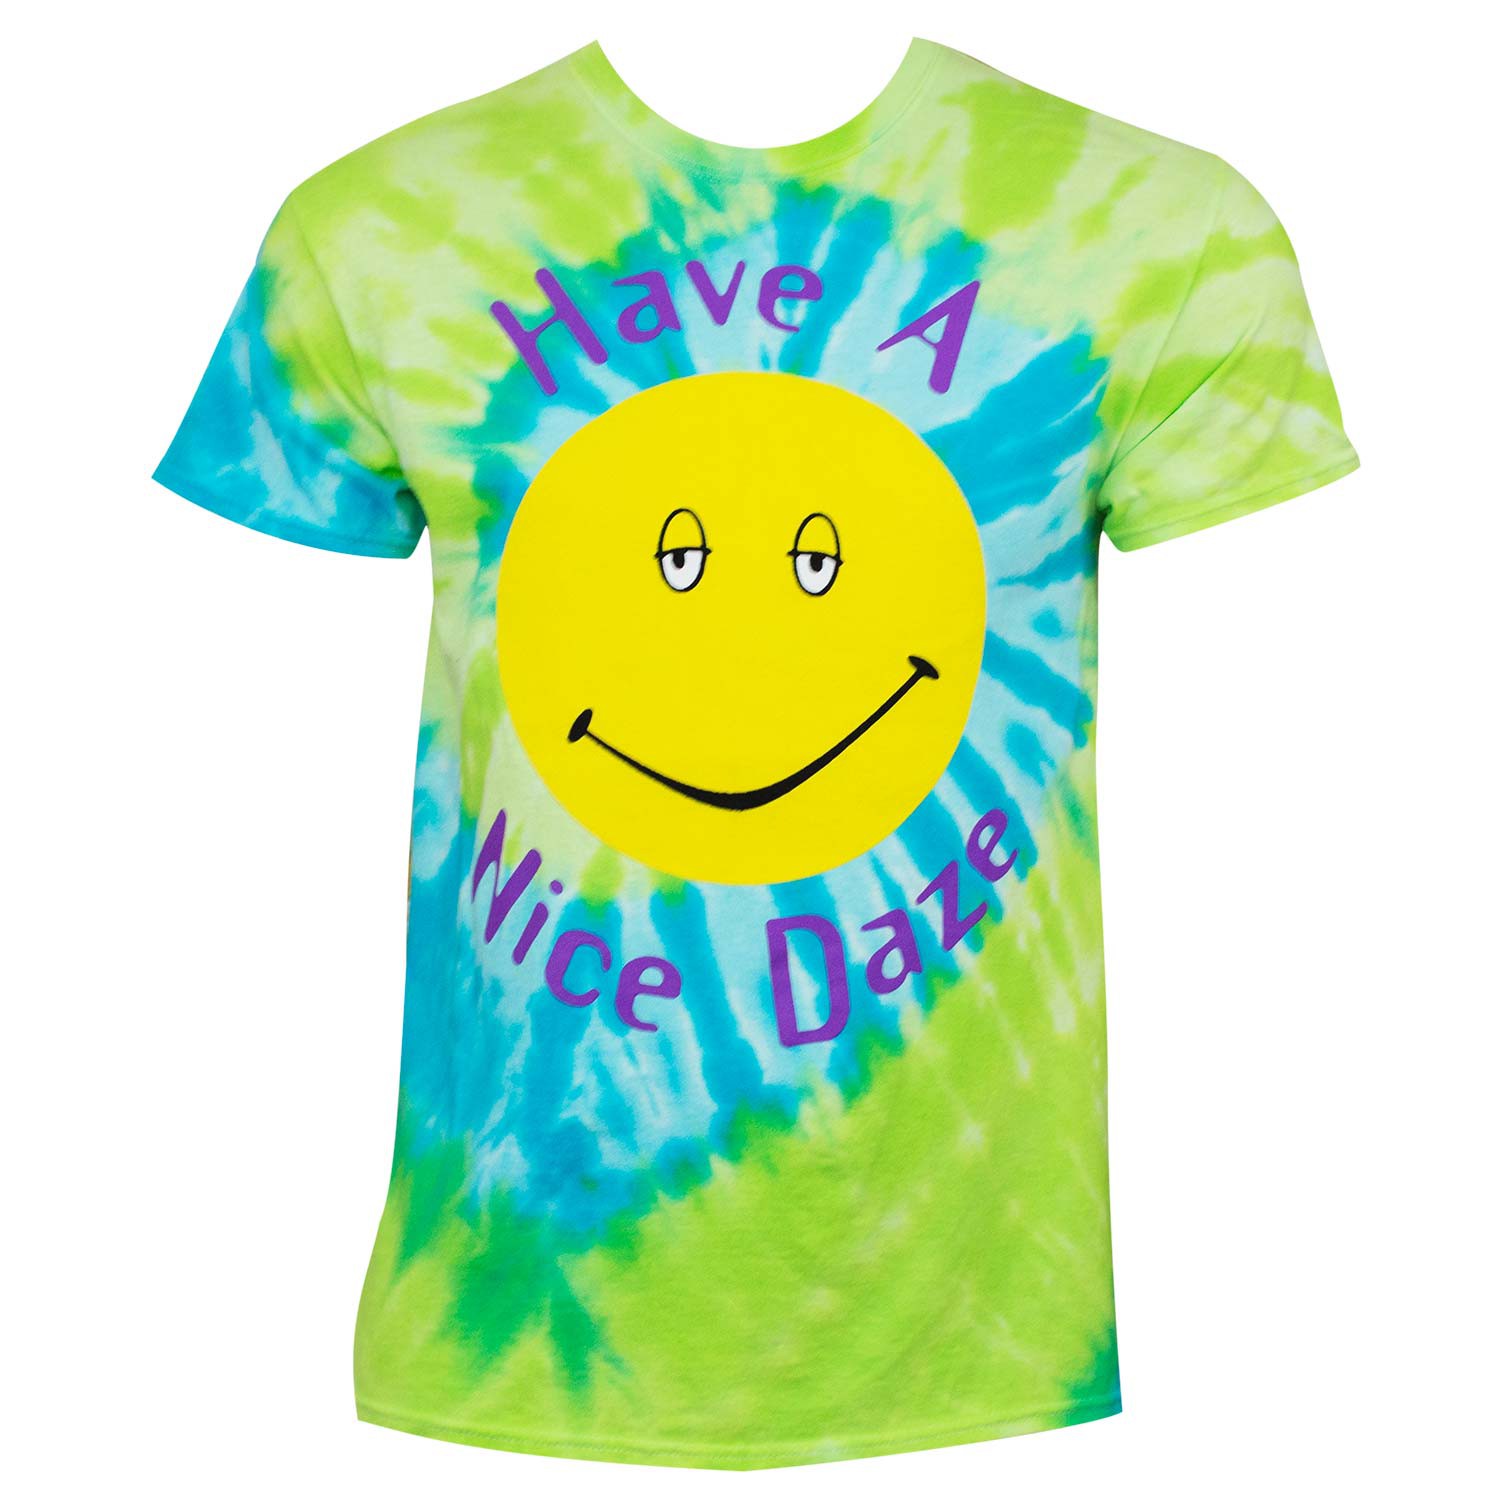 Dazed And Confused Have A Nice Daze Tee Shirt